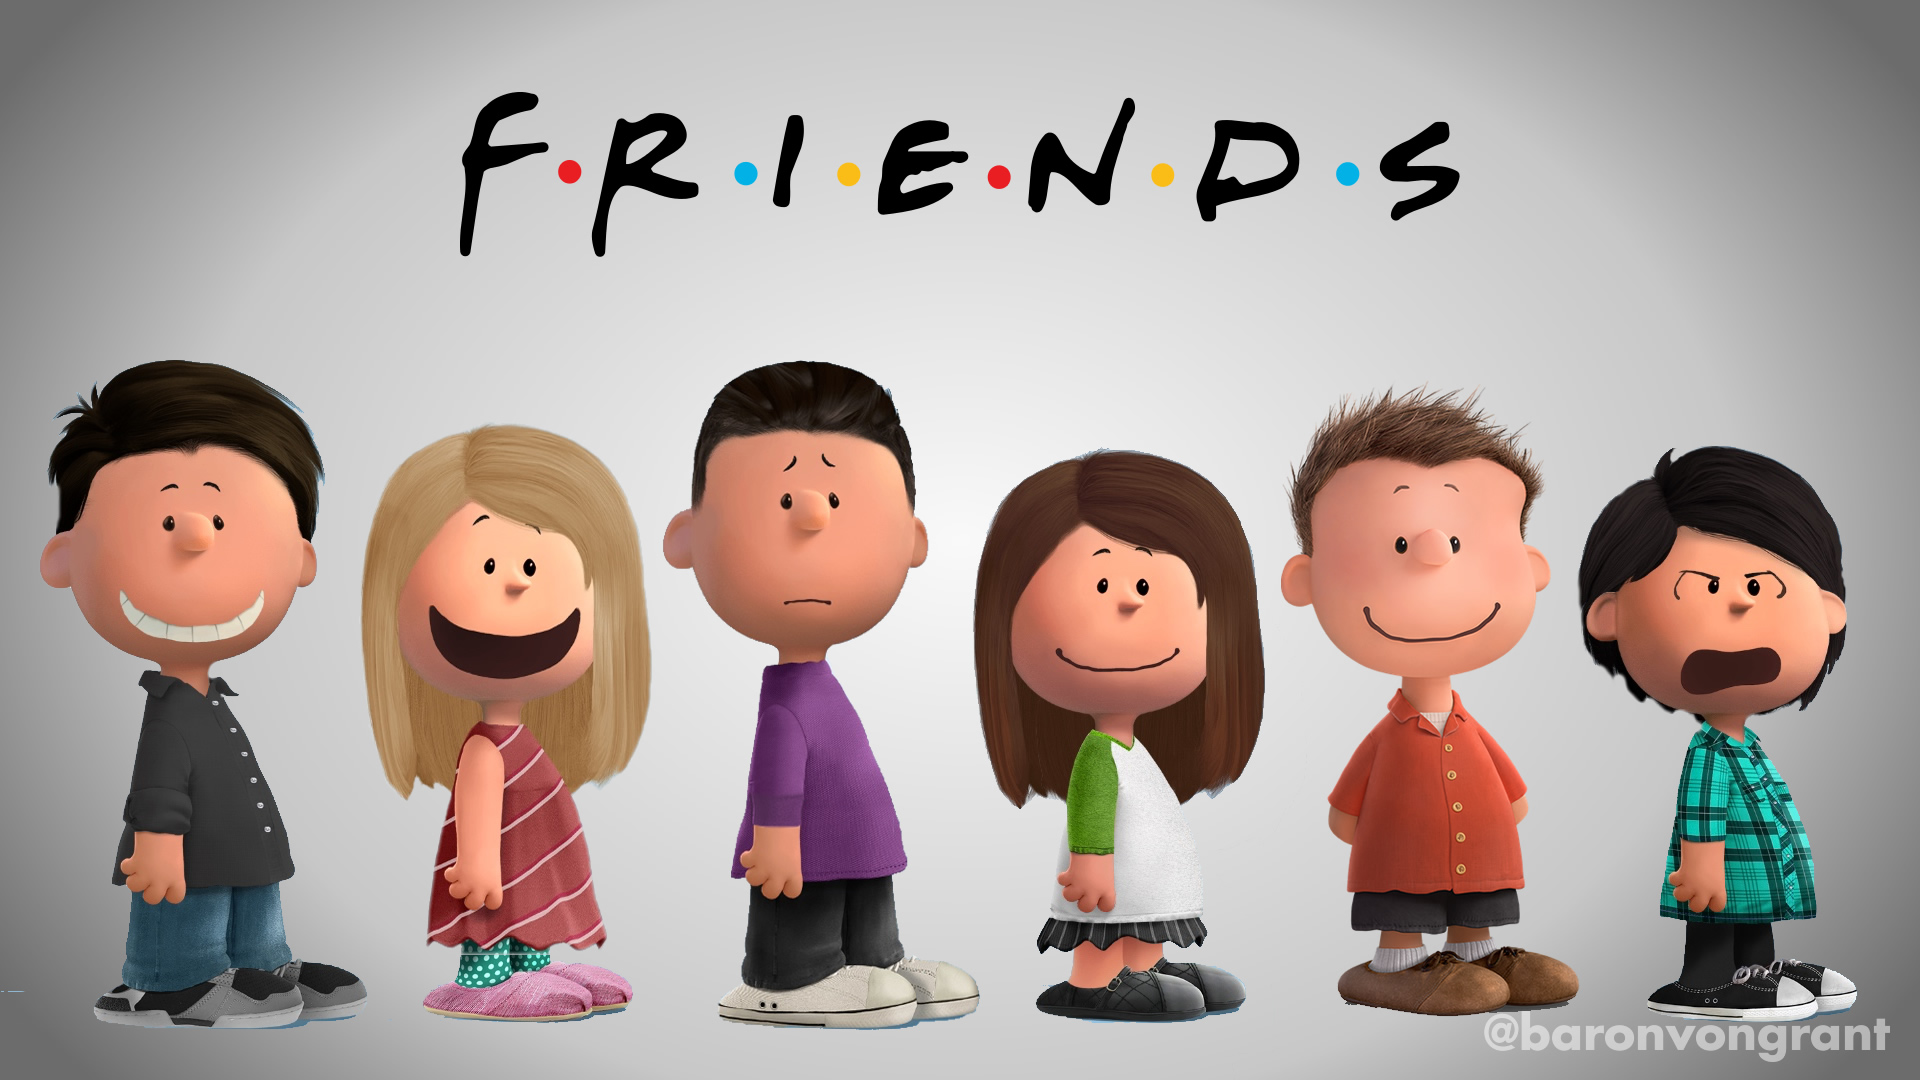 35 Pictures Of Famous And Loved Shows In "Peanuts" Style